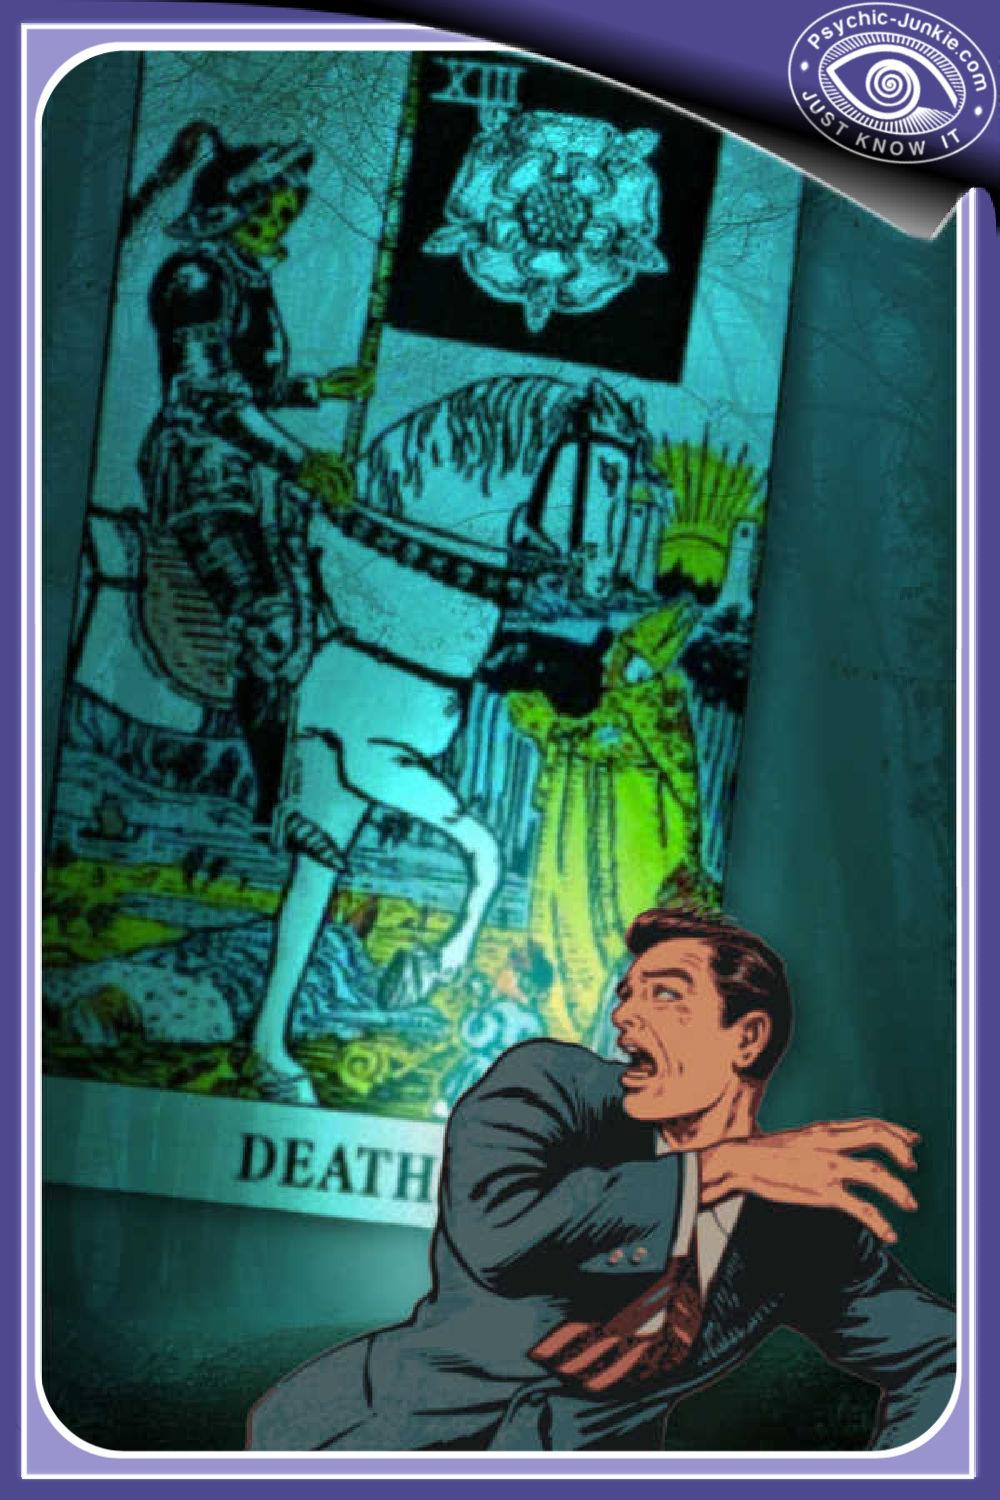 What does the death tarot card represent?